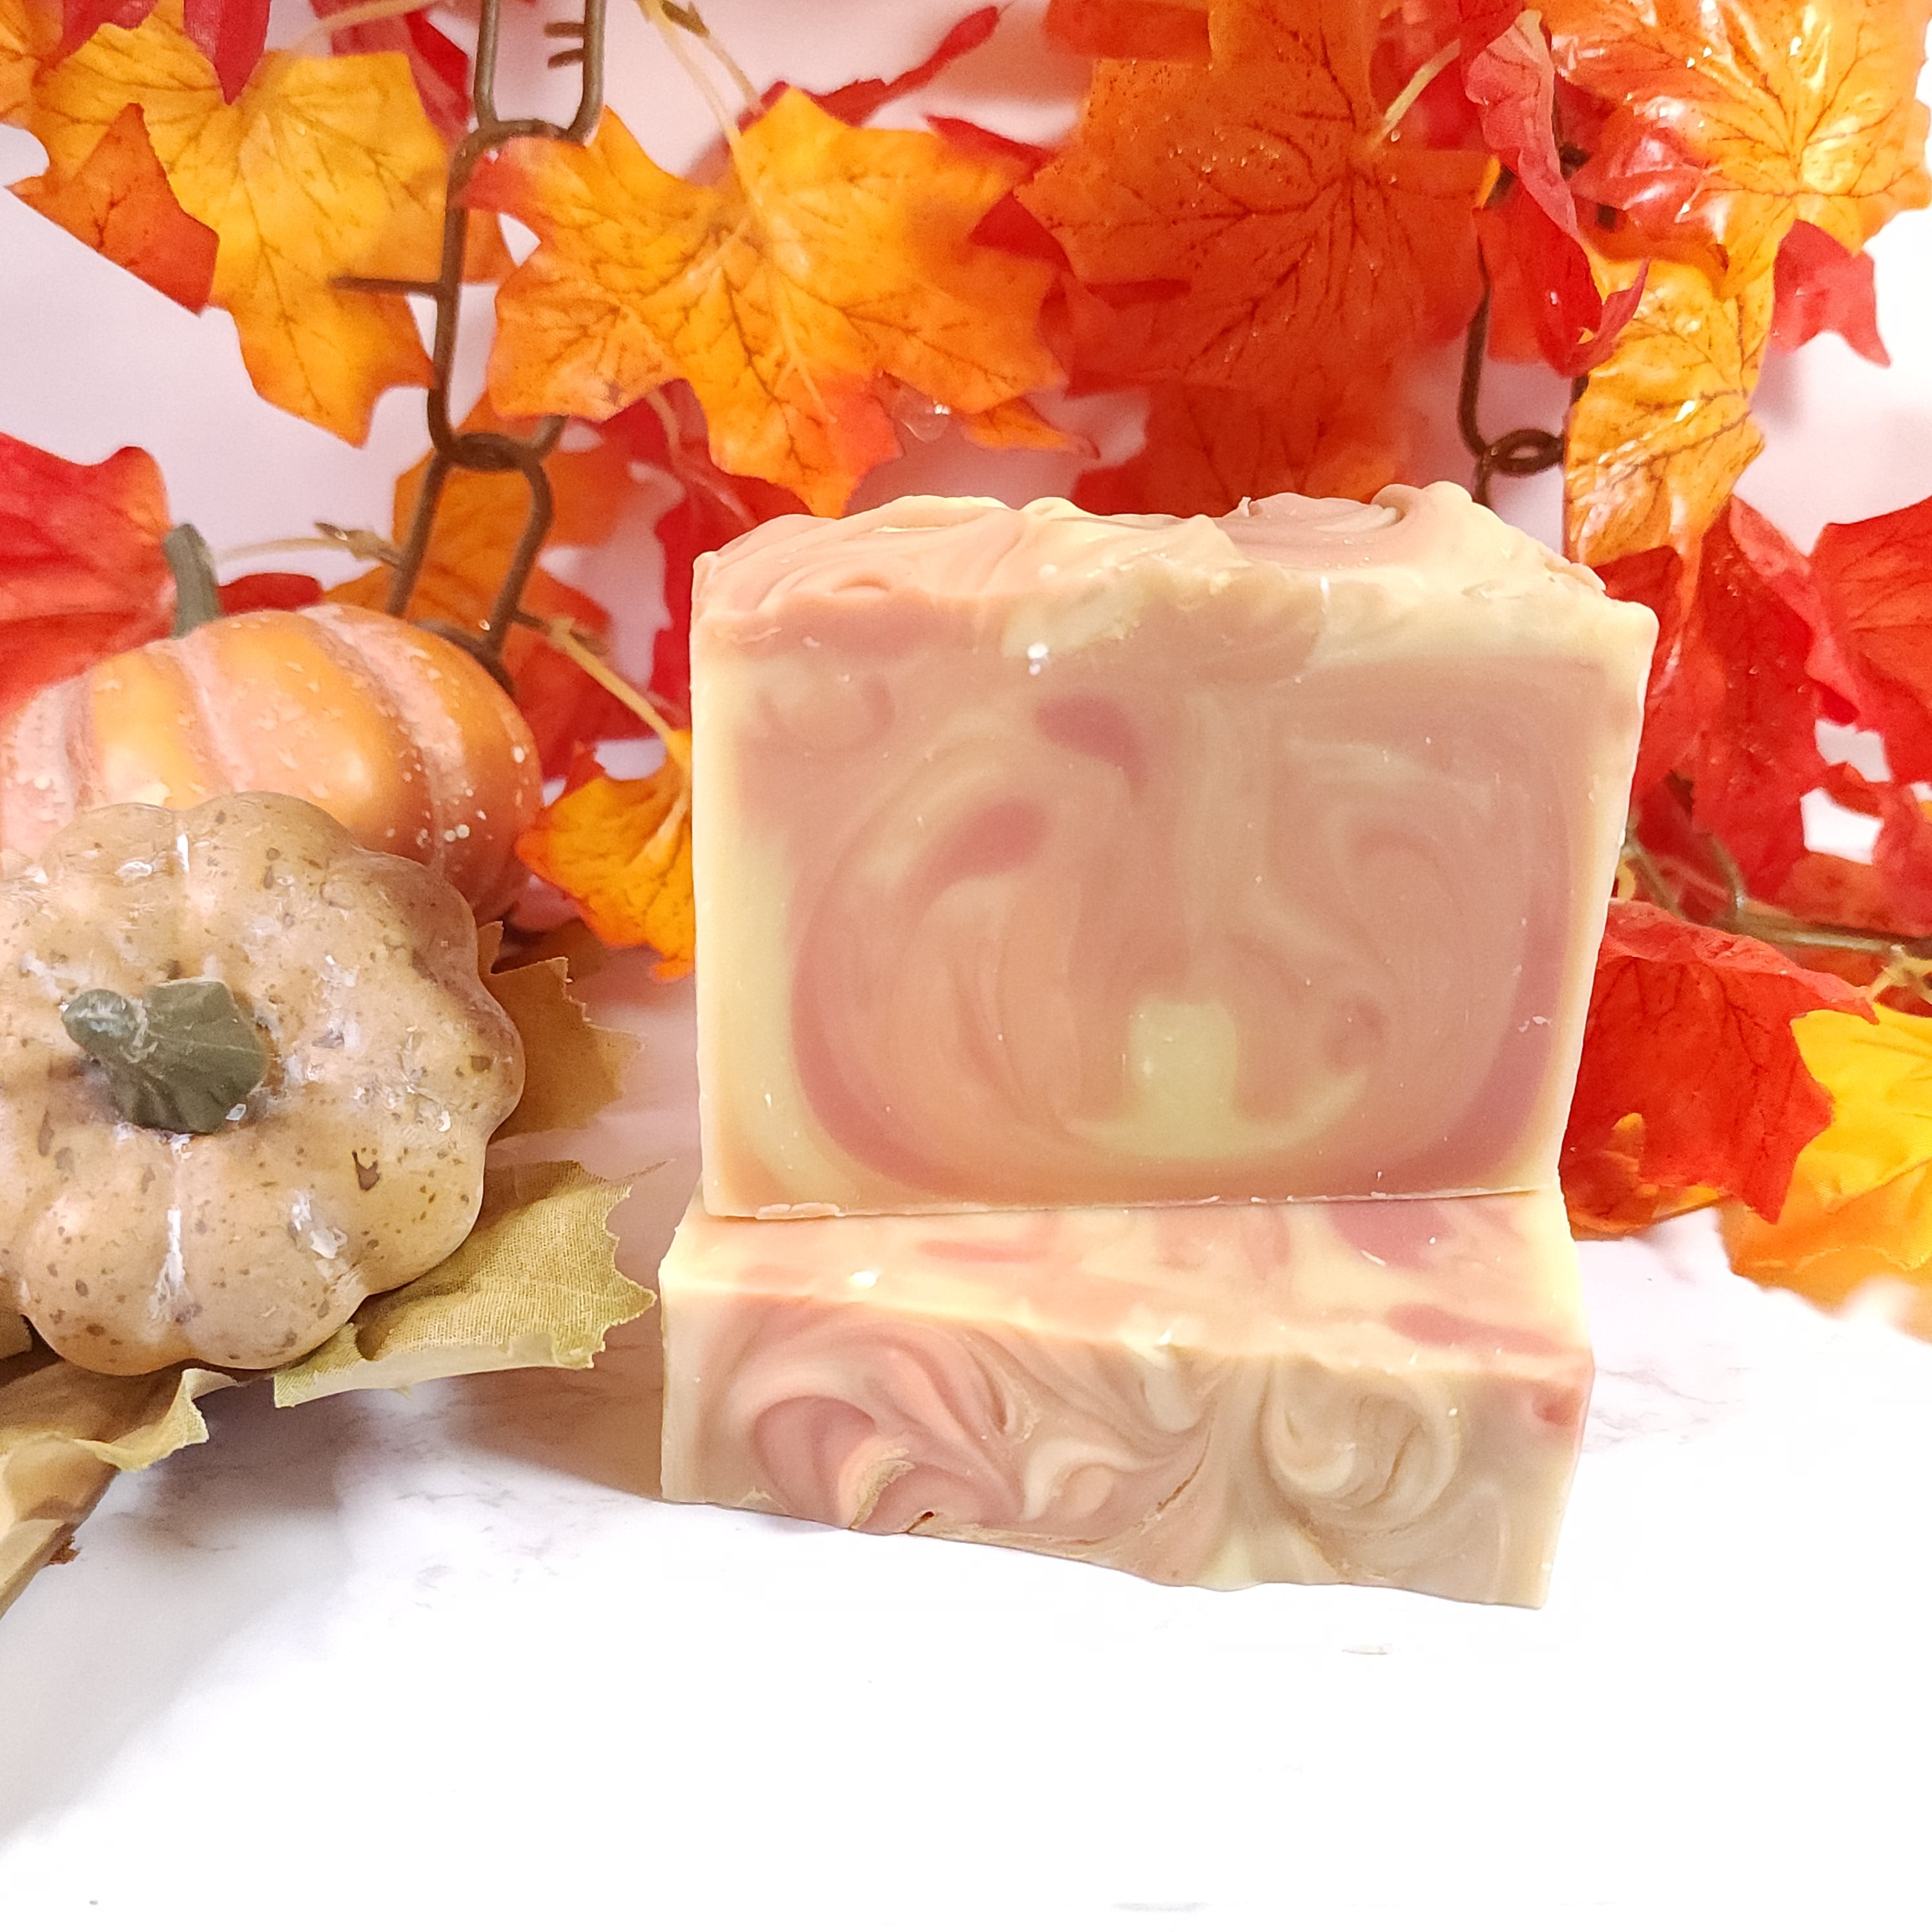 Oatmeal Soap – Faces By Donnalisa